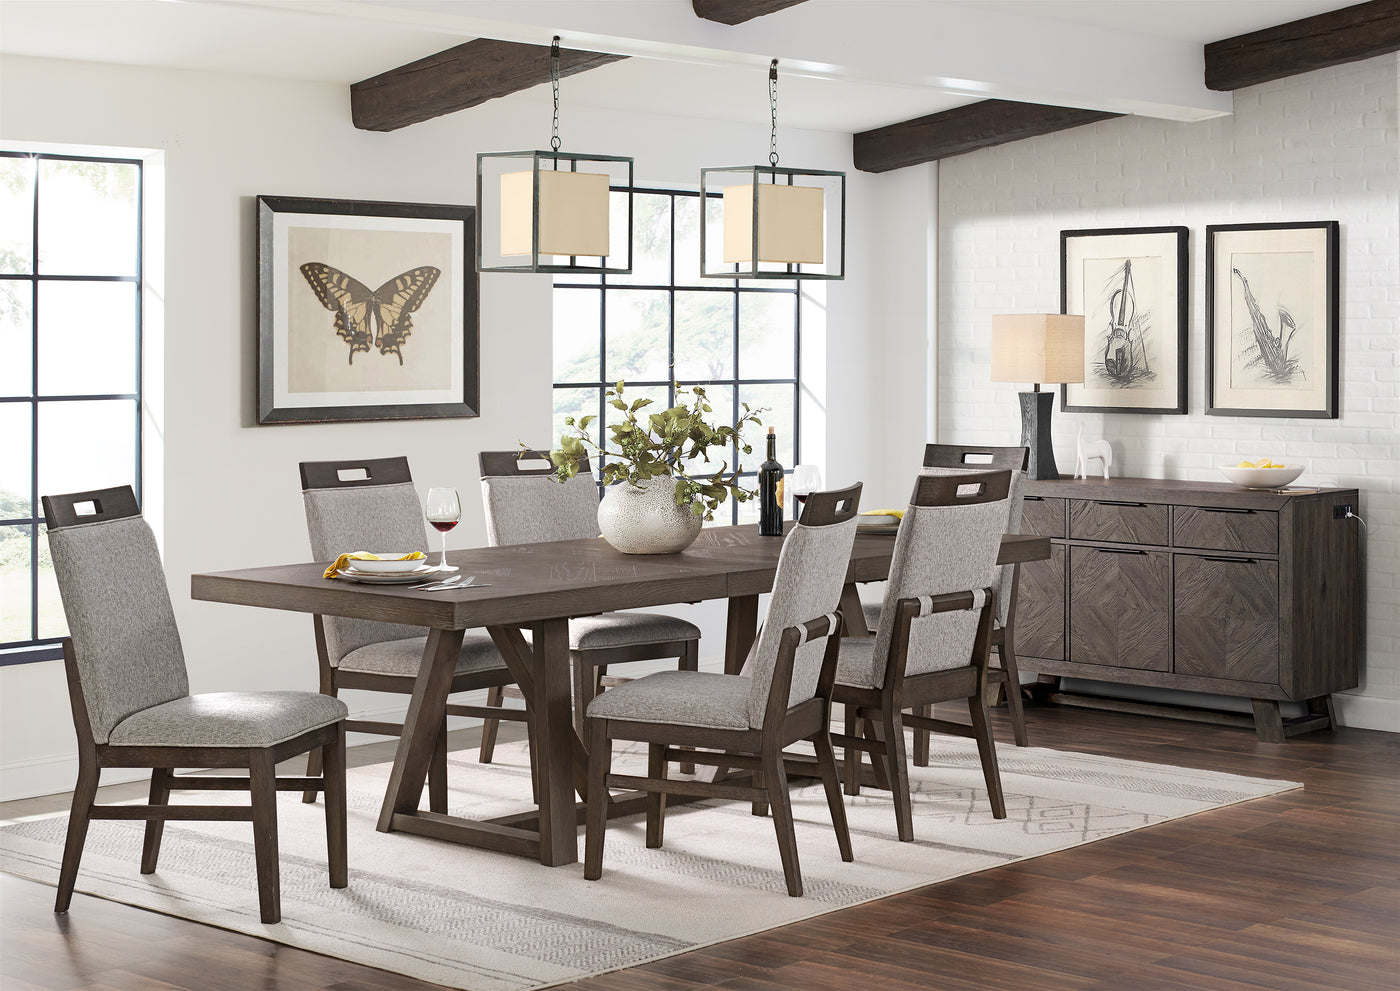 Hearst 7-Piece Extendable Dining Set with Upholstered Dining Chairs - Brown, Beige